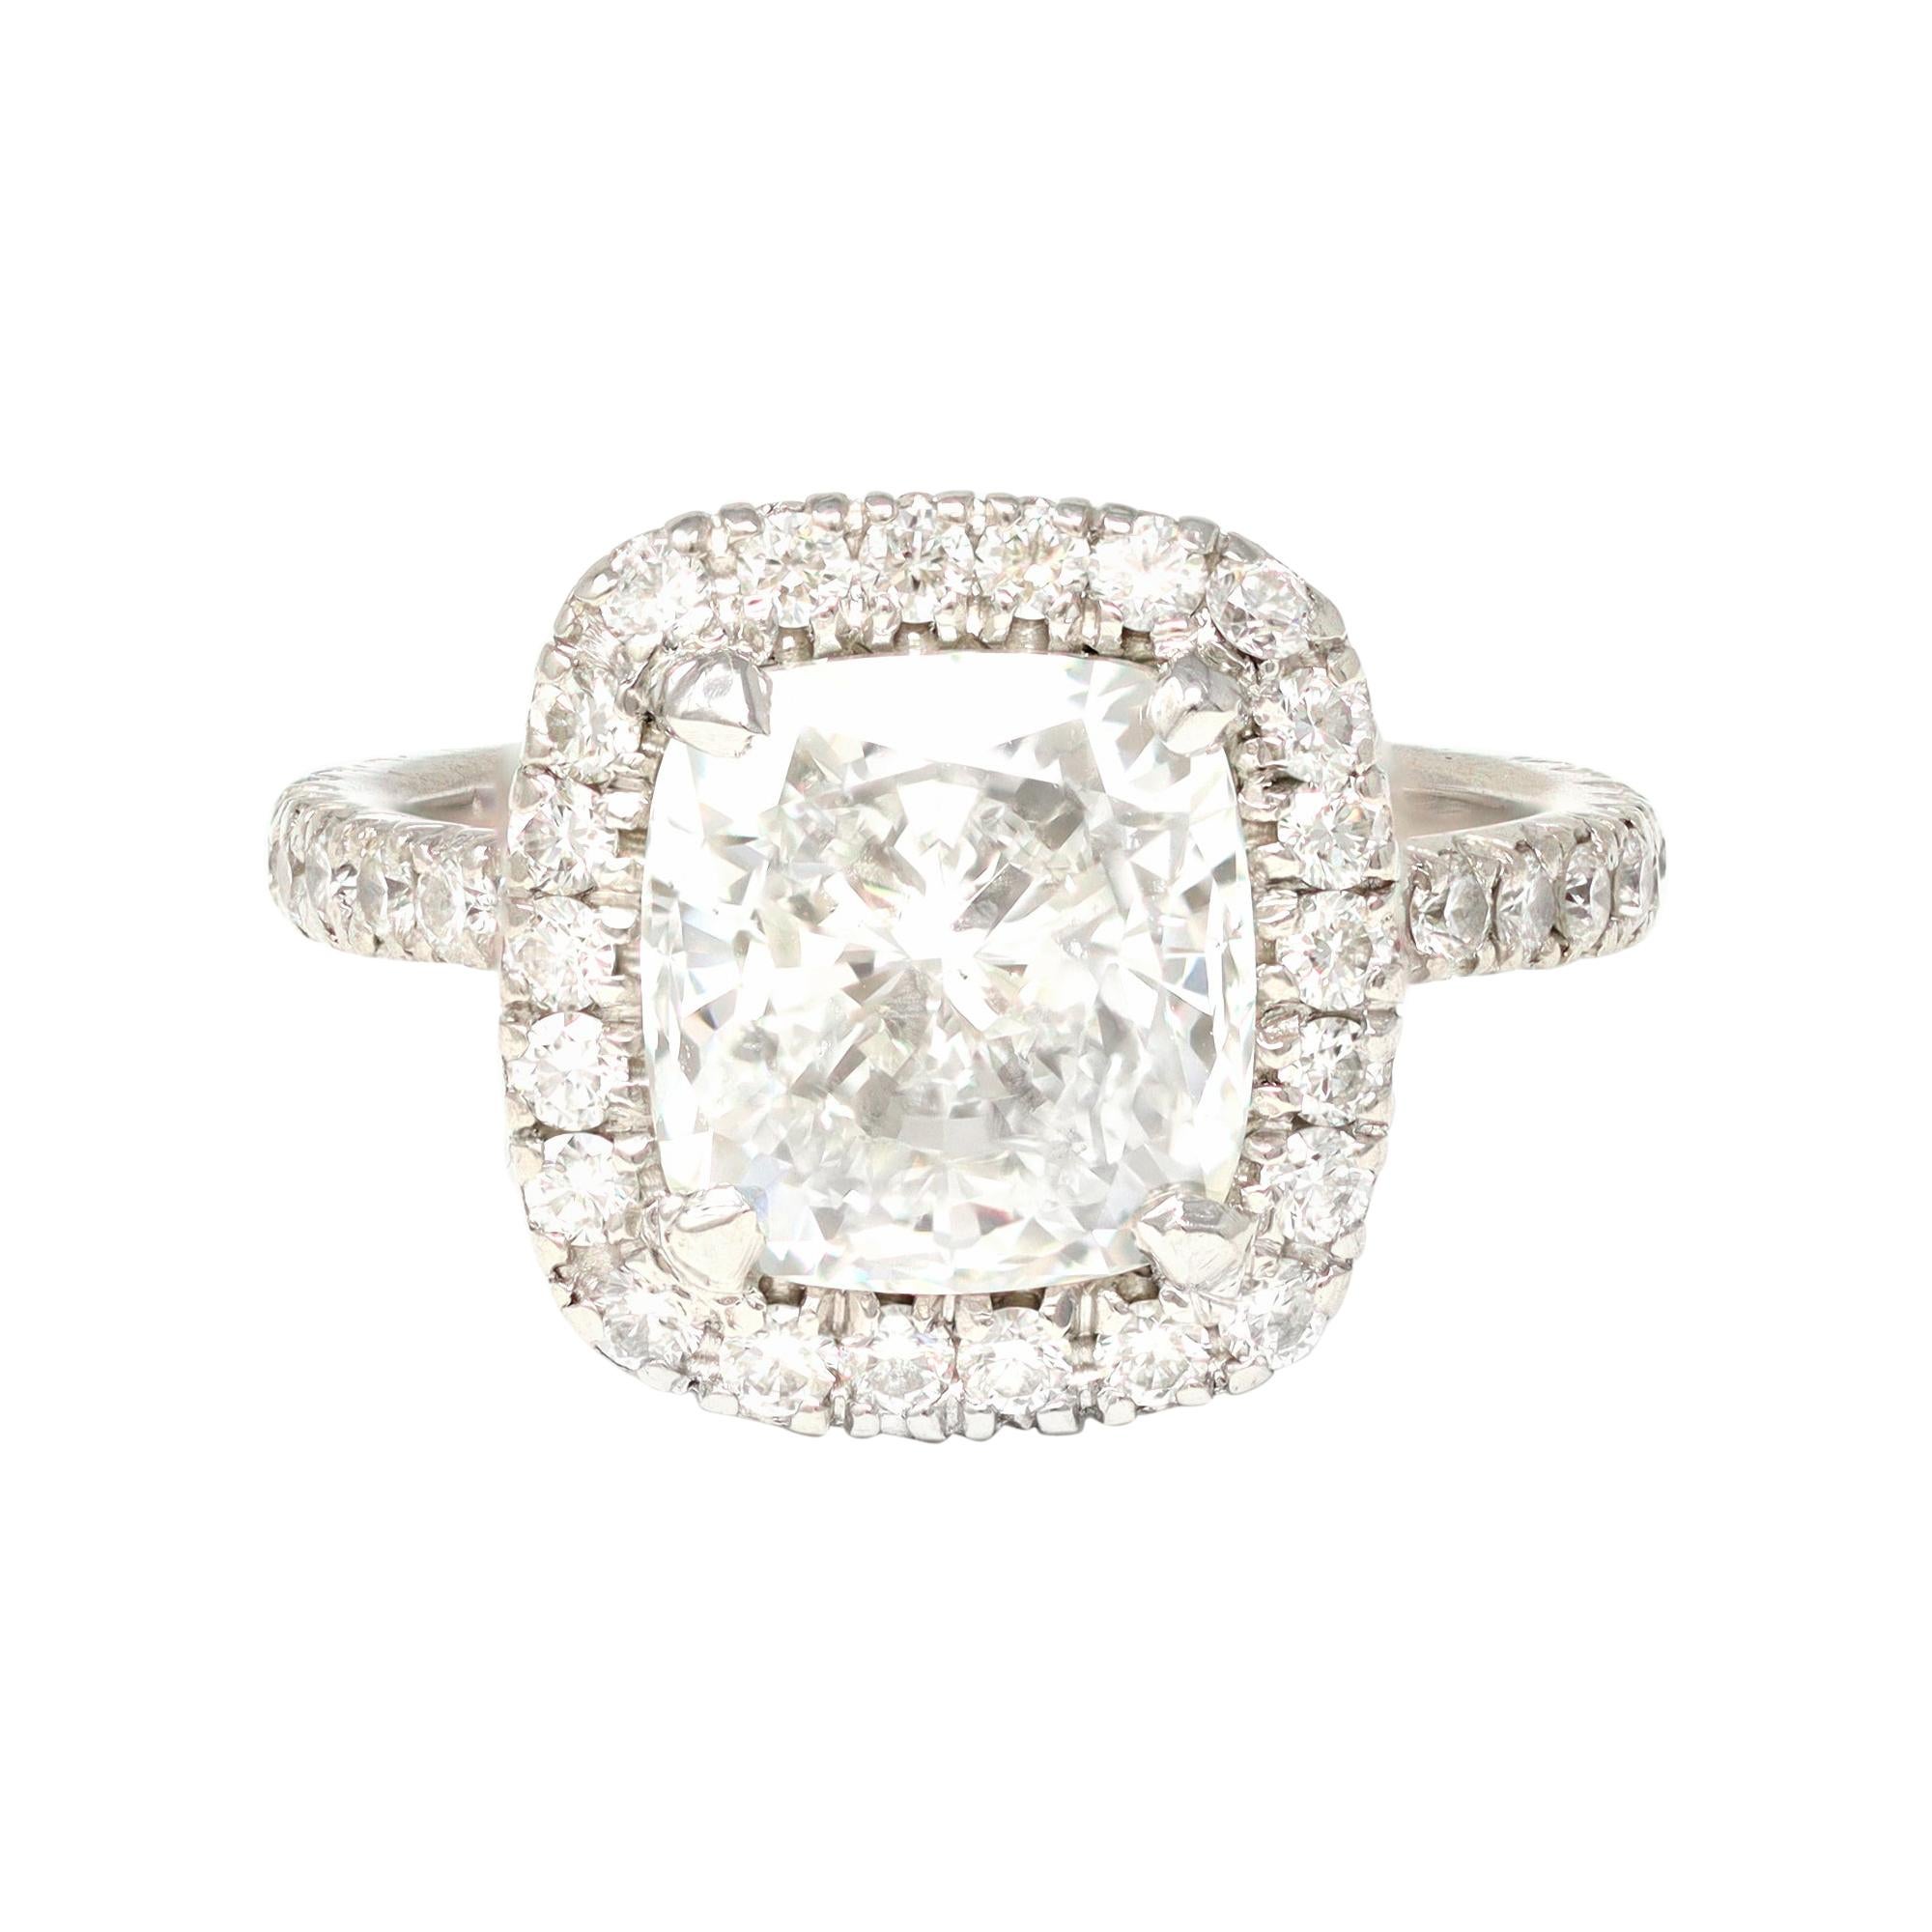 GIA Certified 3.07 Cushion Cut Solitaire Diamond Halo Ring in Platinum